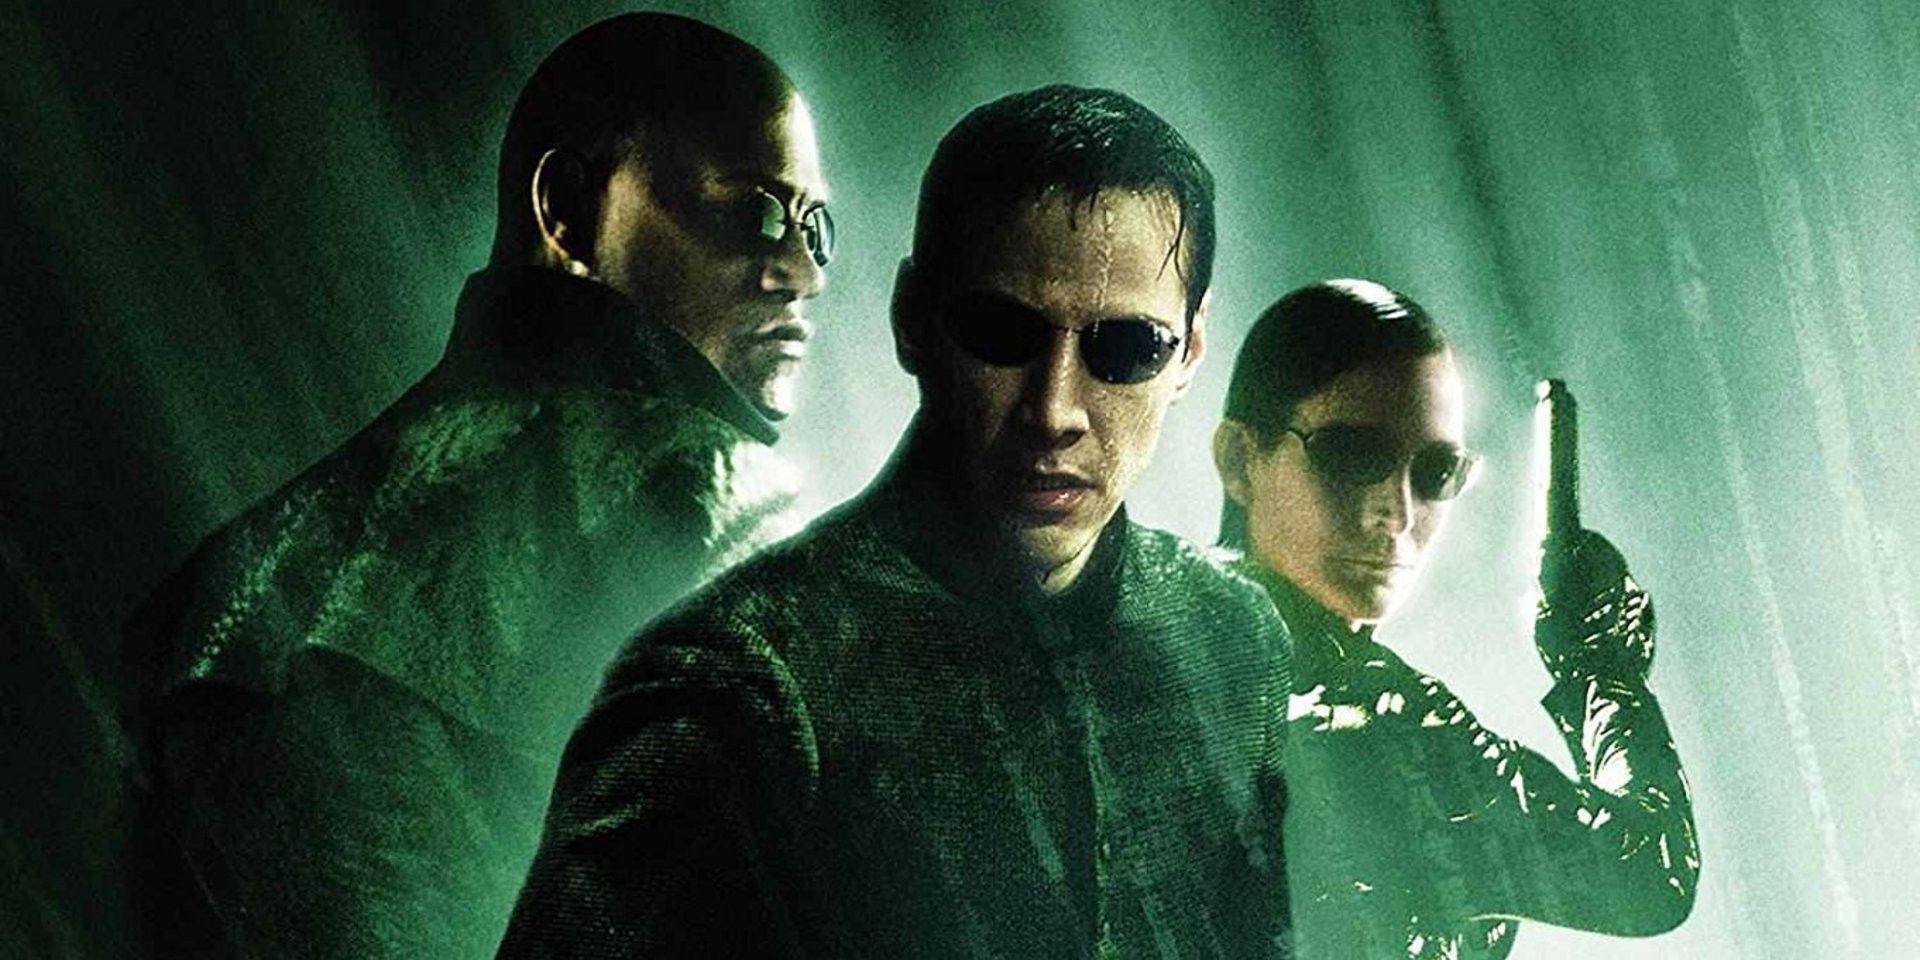 Neo, Trinity, and Morpheus in the Matrix poster